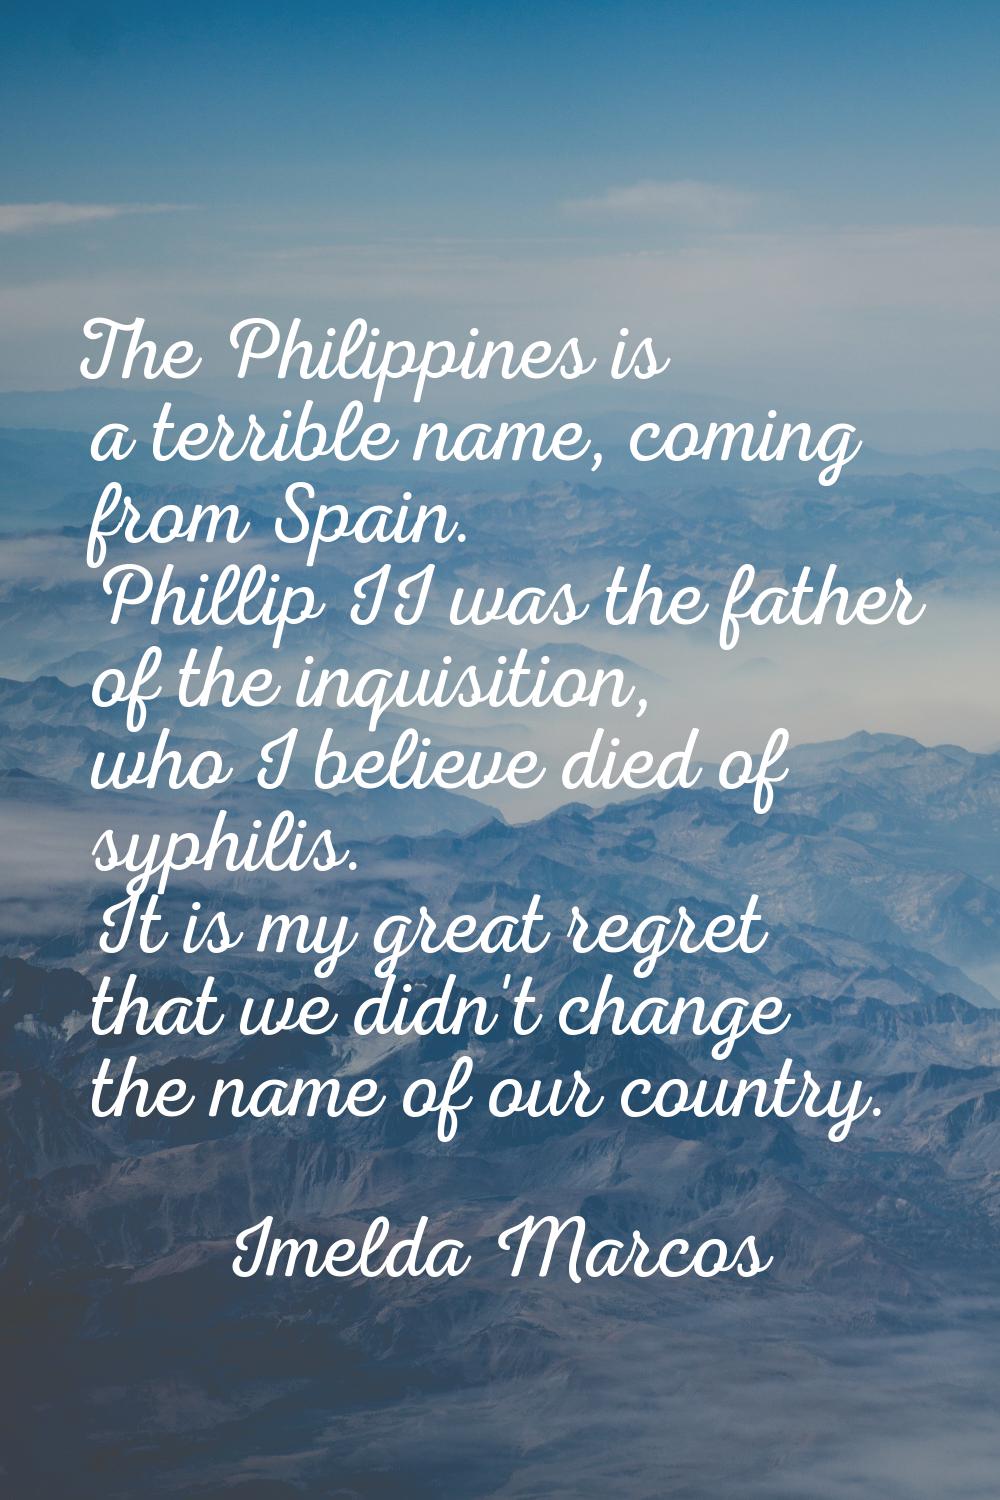 The Philippines is a terrible name, coming from Spain. Phillip II was the father of the inquisition